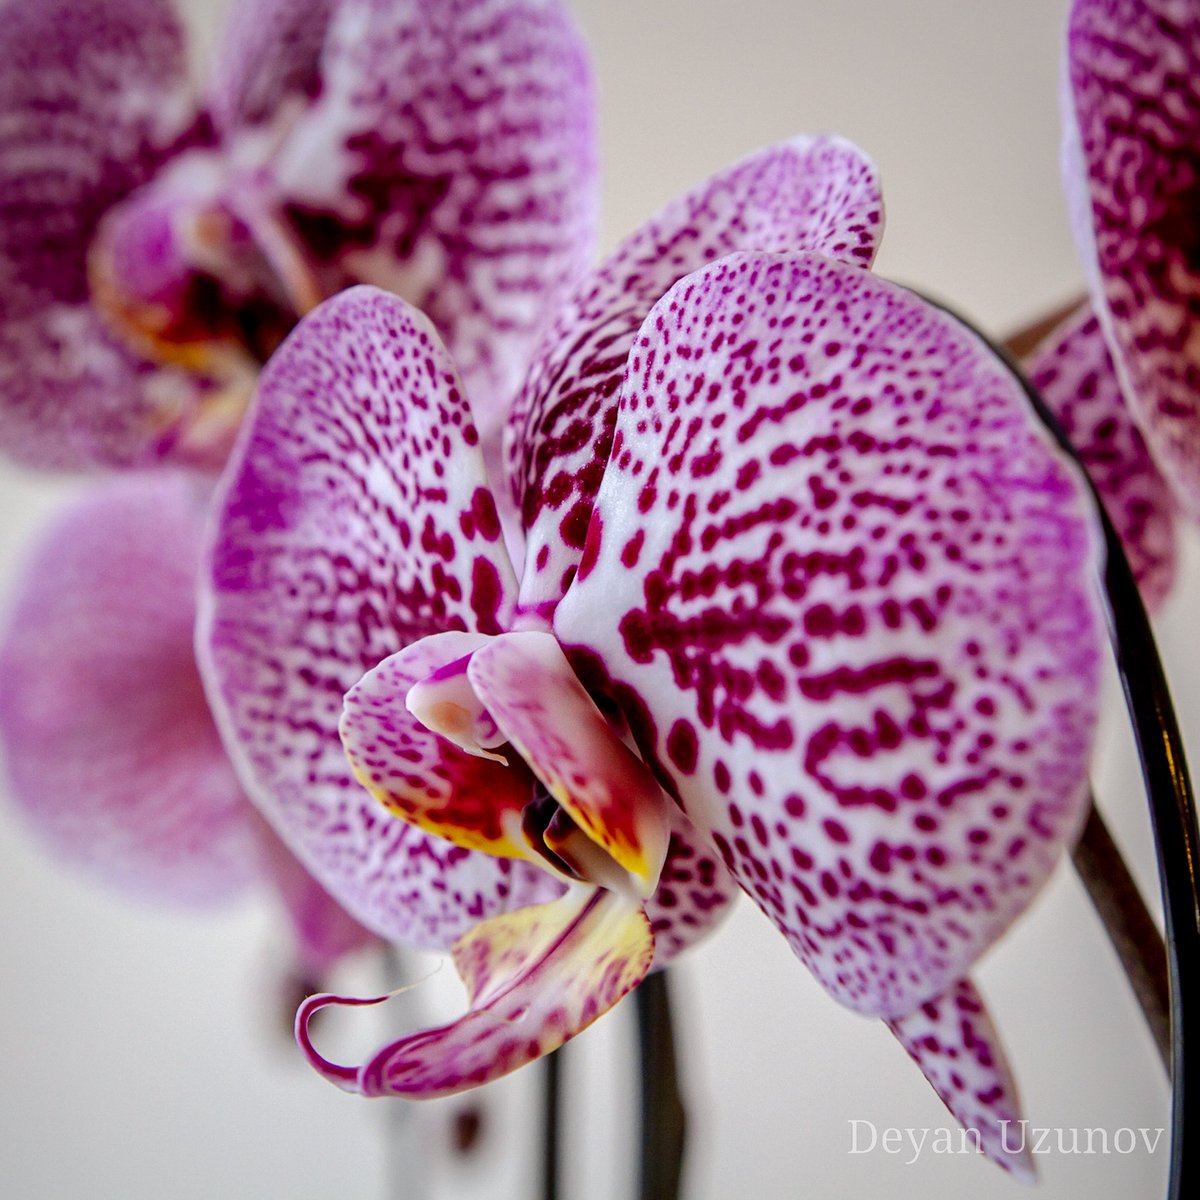 Purple Orchid Close Up
#loveorchids #floral #mostbeautifulflowers